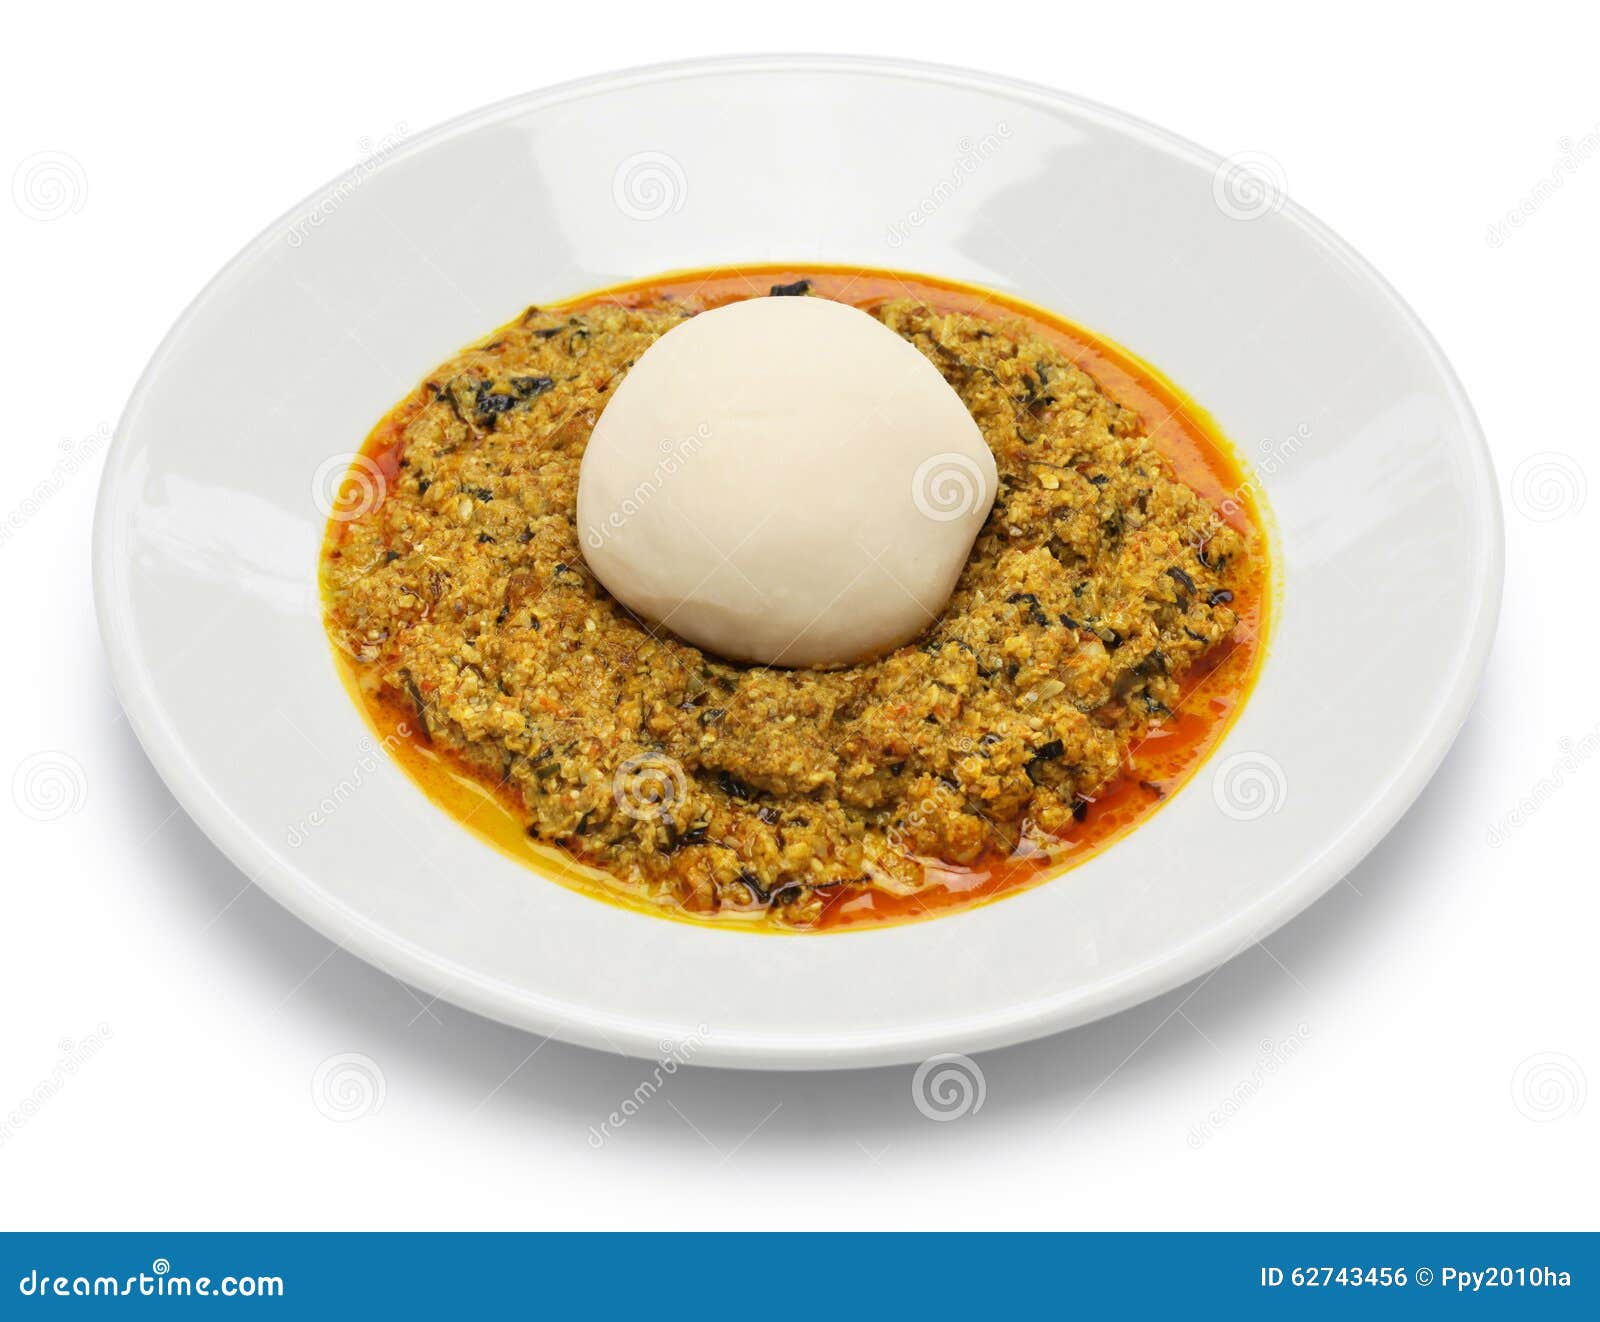 egusi soup and pounded yam, nigerian cuisine